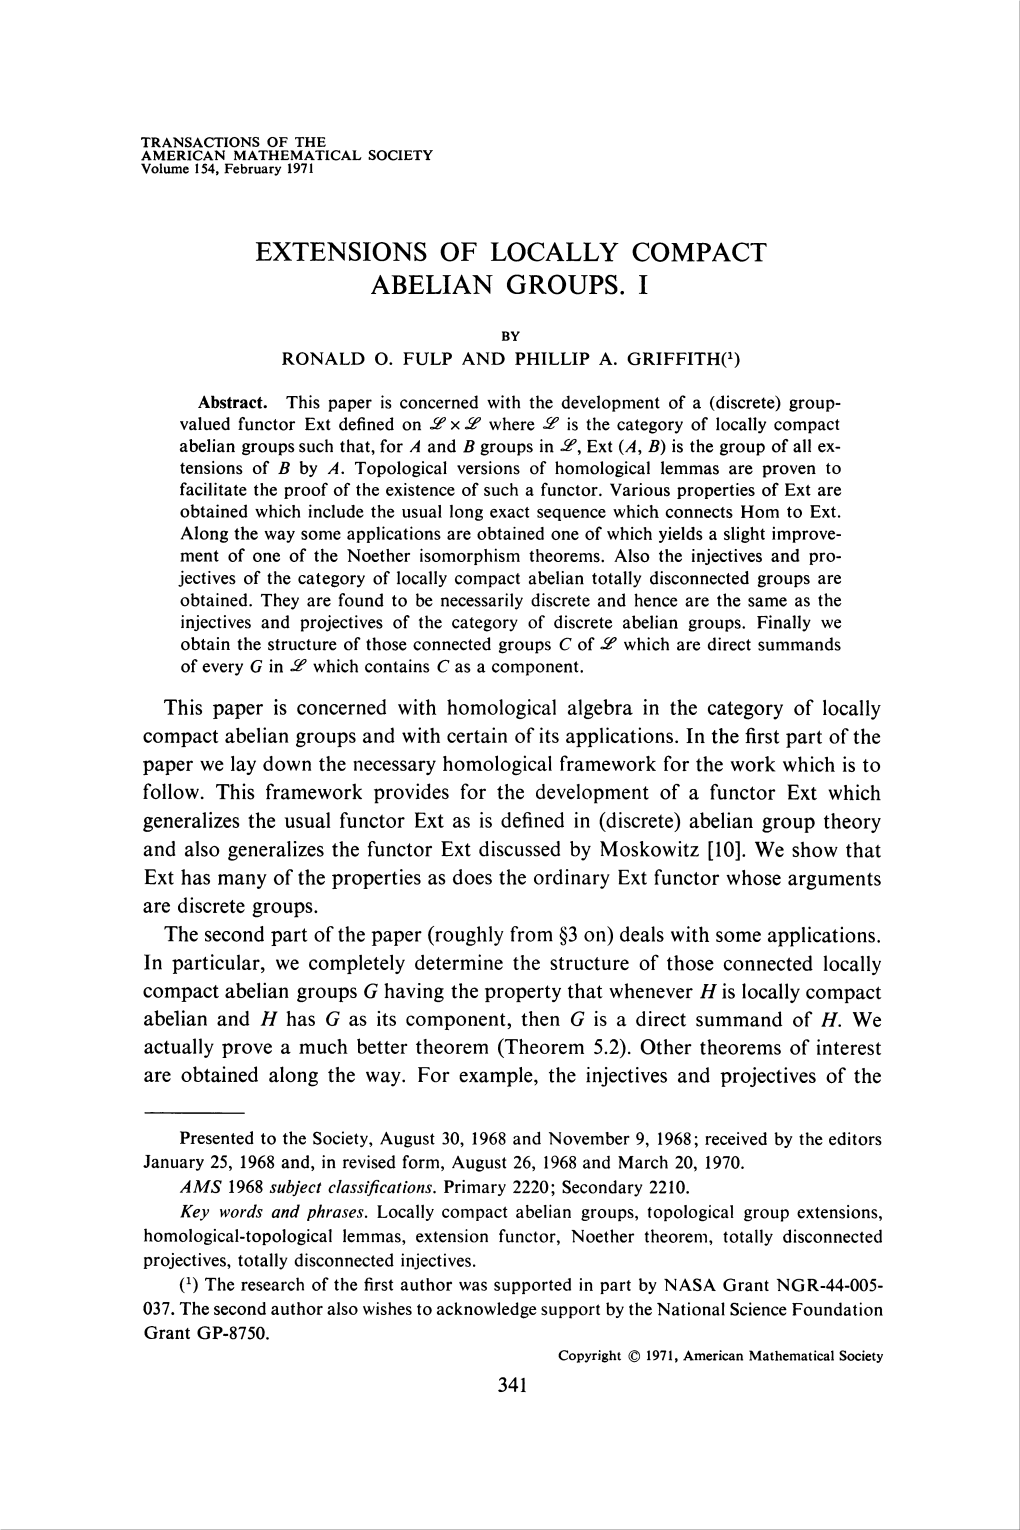 Extensions of Locally Compact Abelian Groups. I